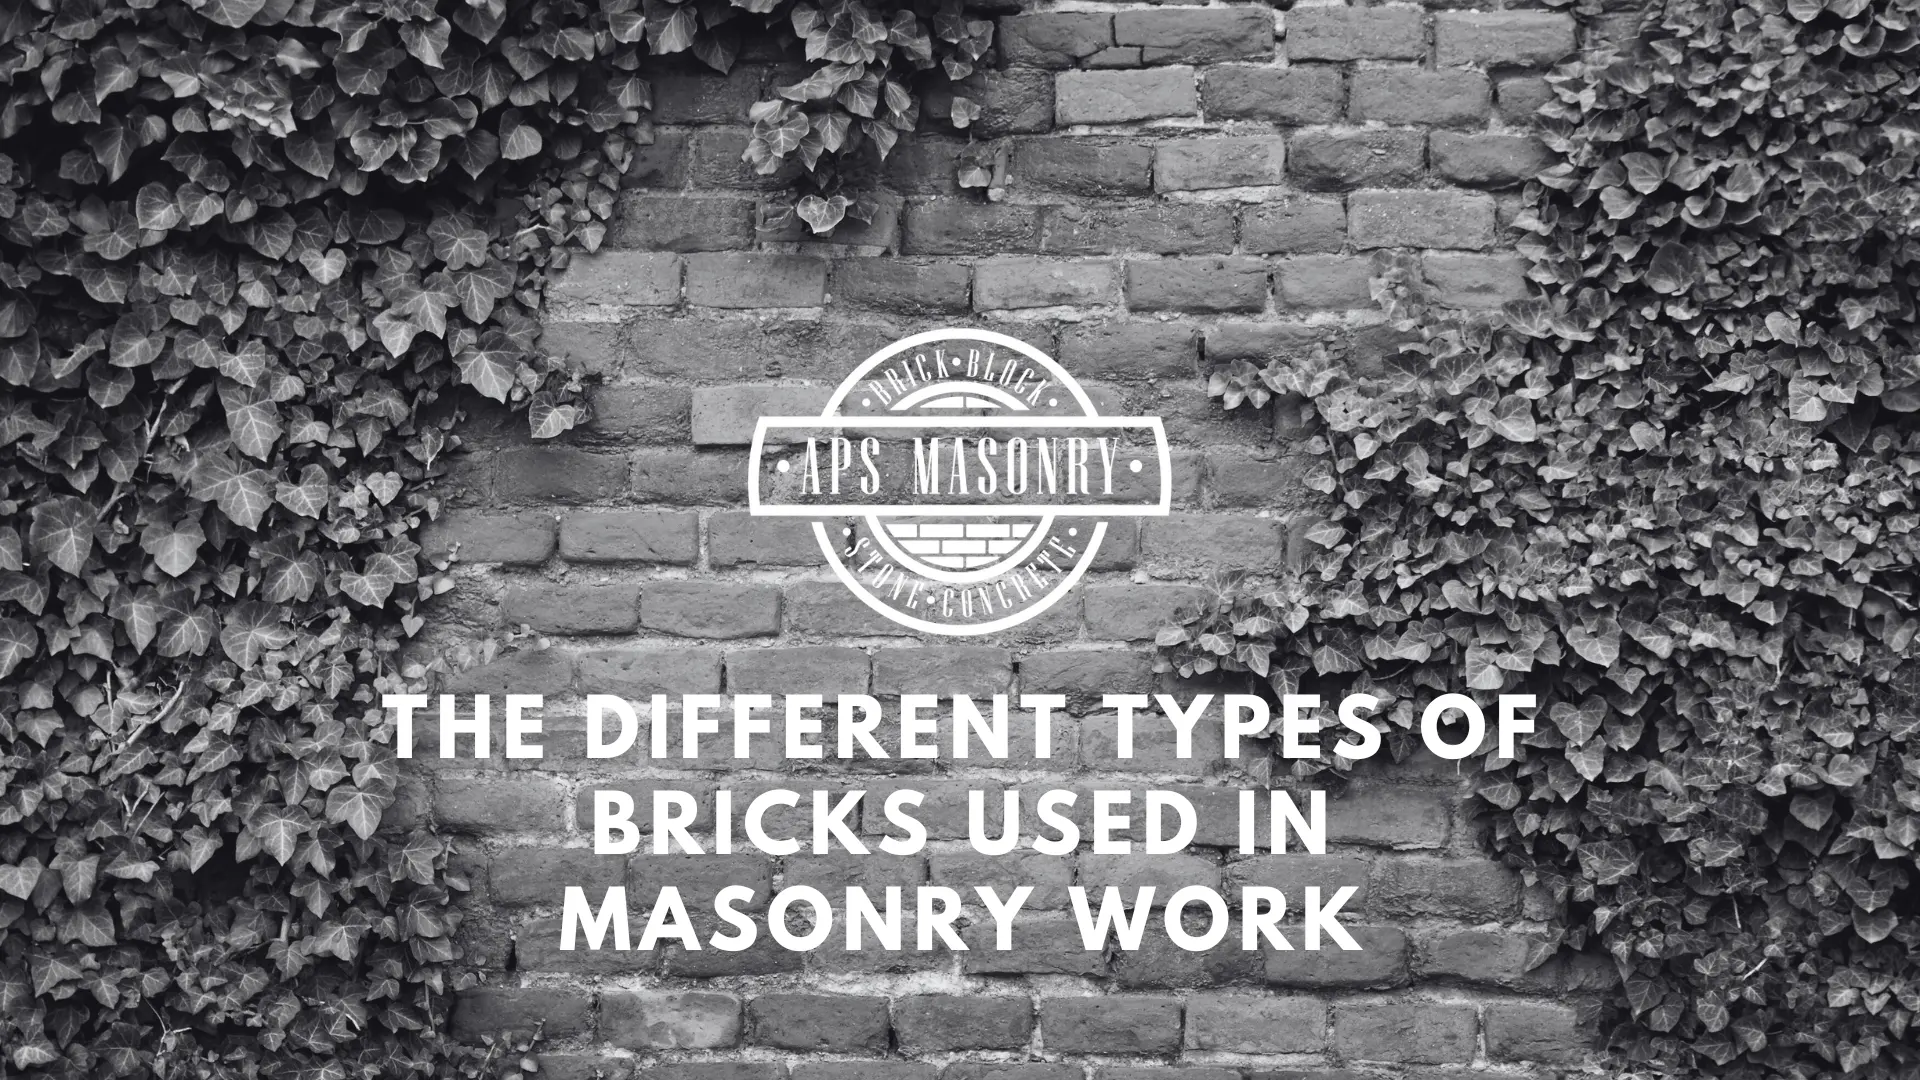 The Different Types of Bricks for Masonry Work